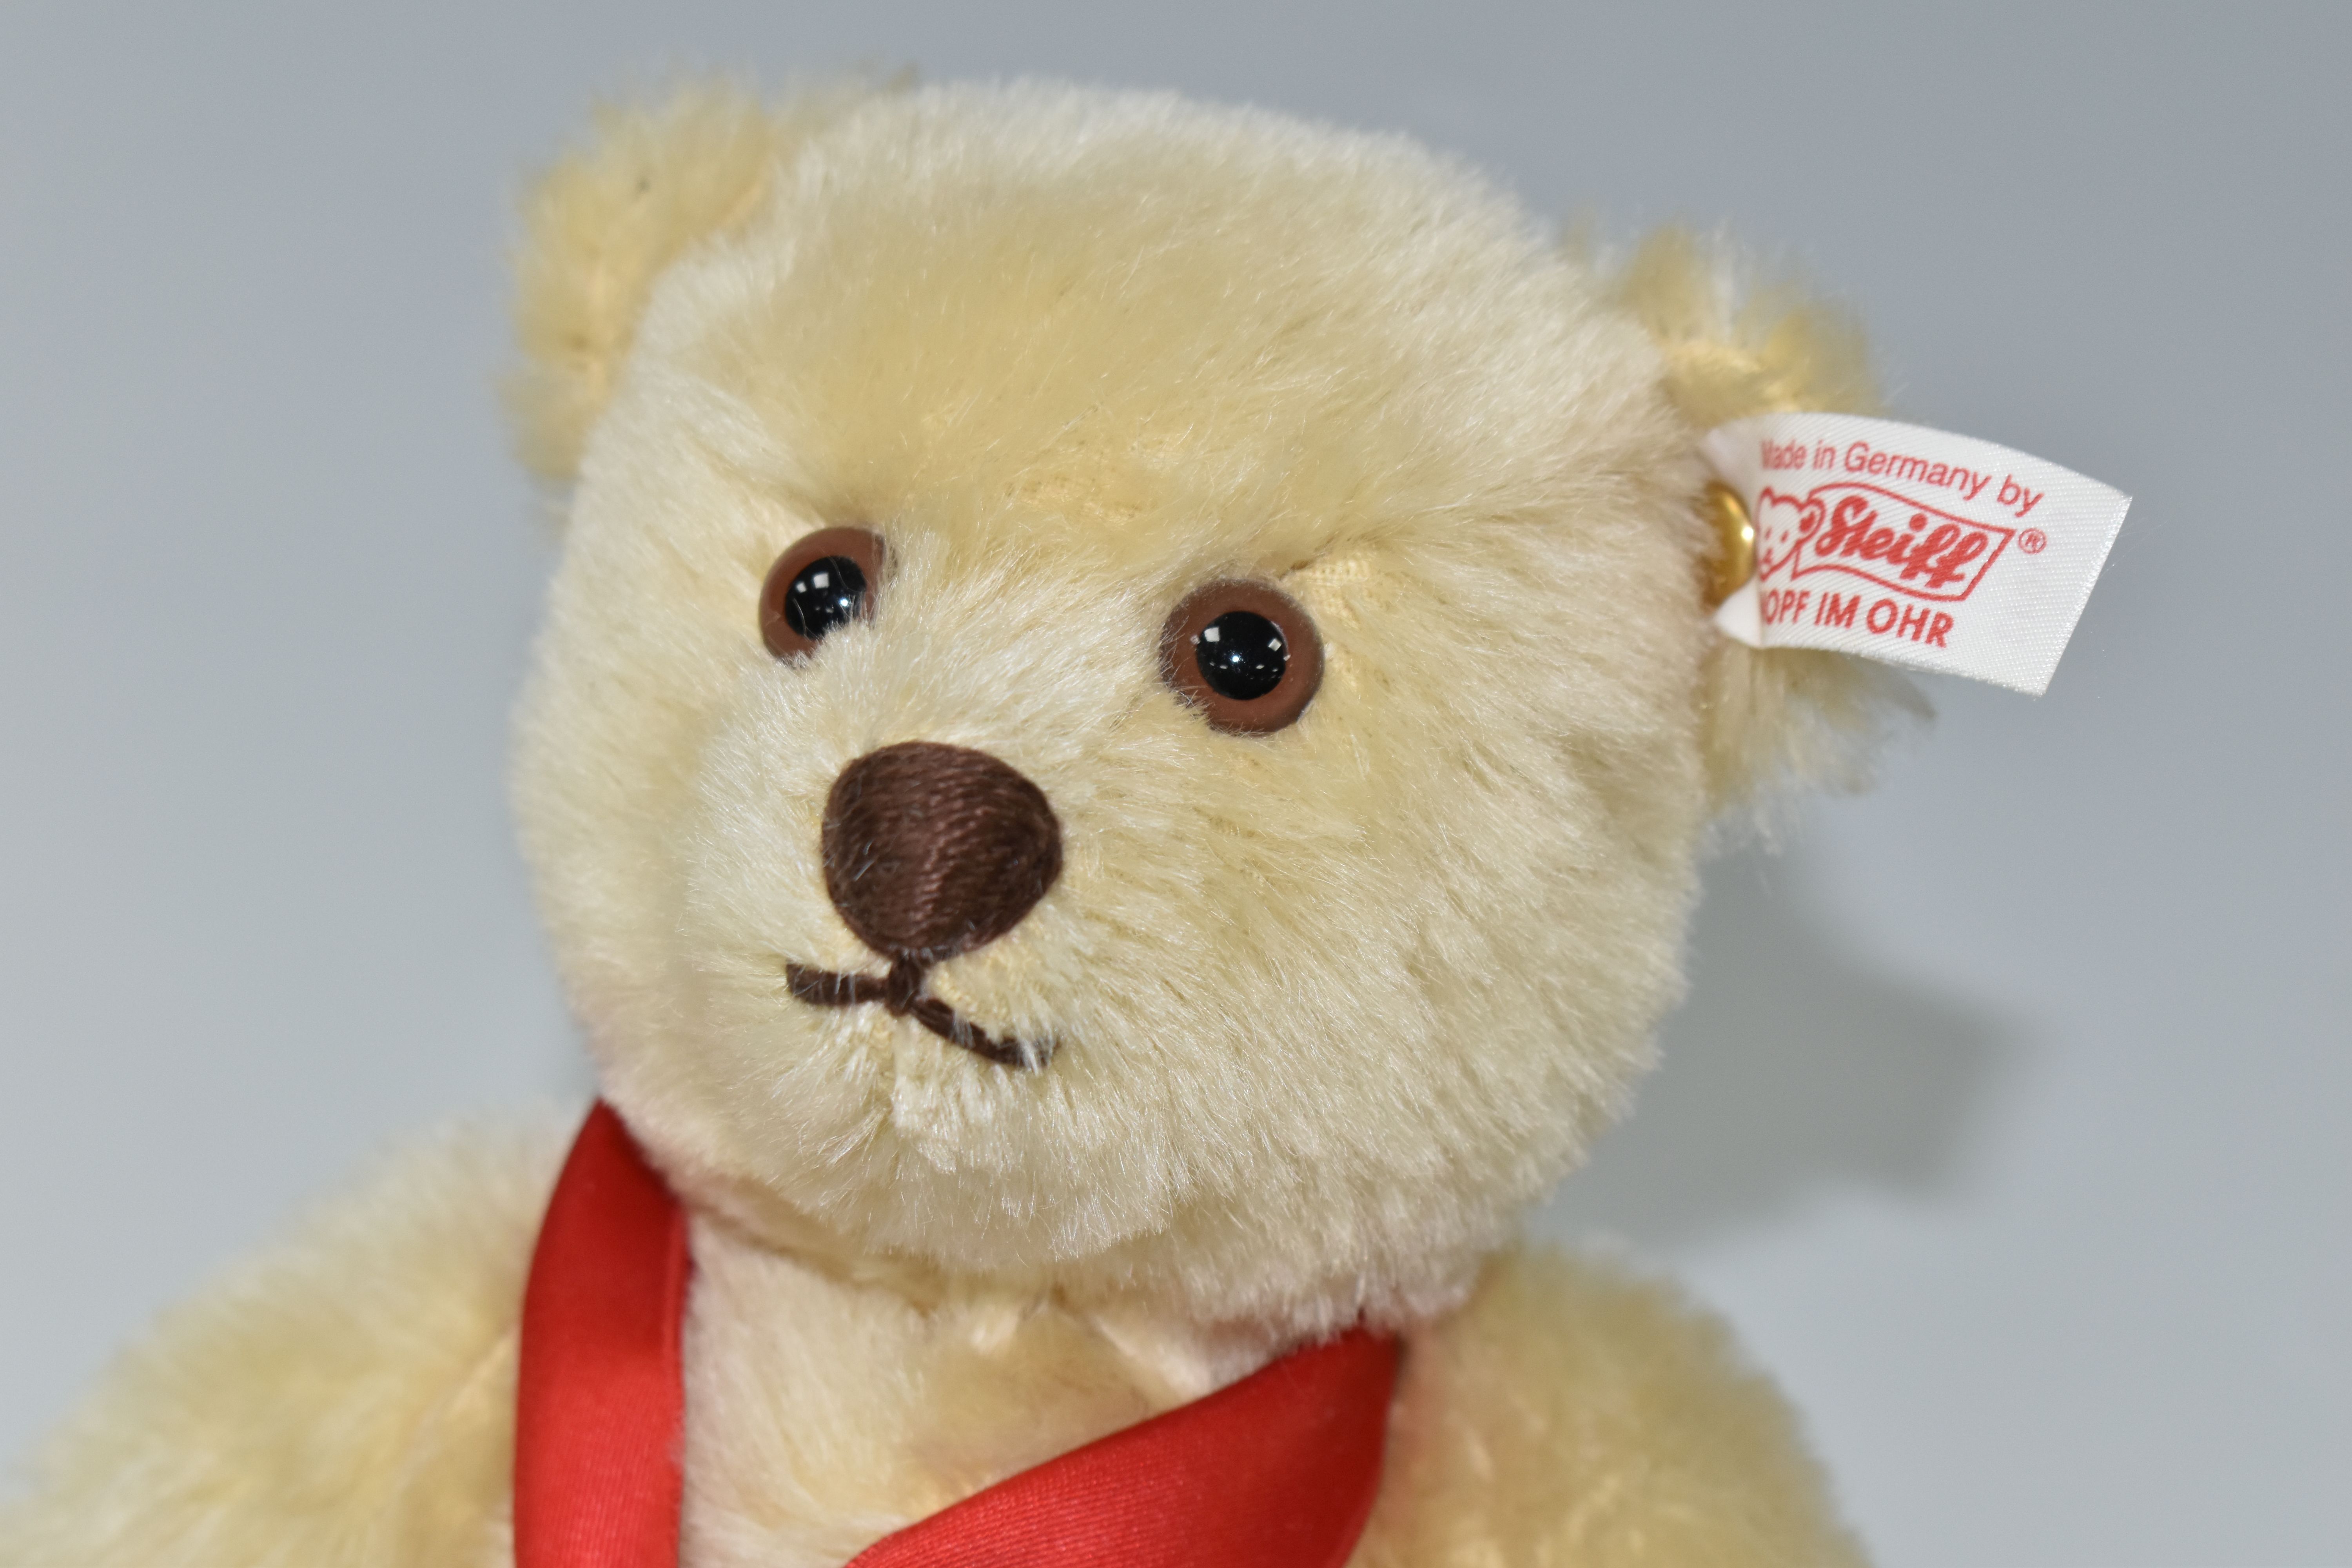 A STEIFF 100 YEARS ANNIVERSARY TEDDY BEAR, light blonde mohair 'fur', gold coloured ear button and - Image 3 of 3